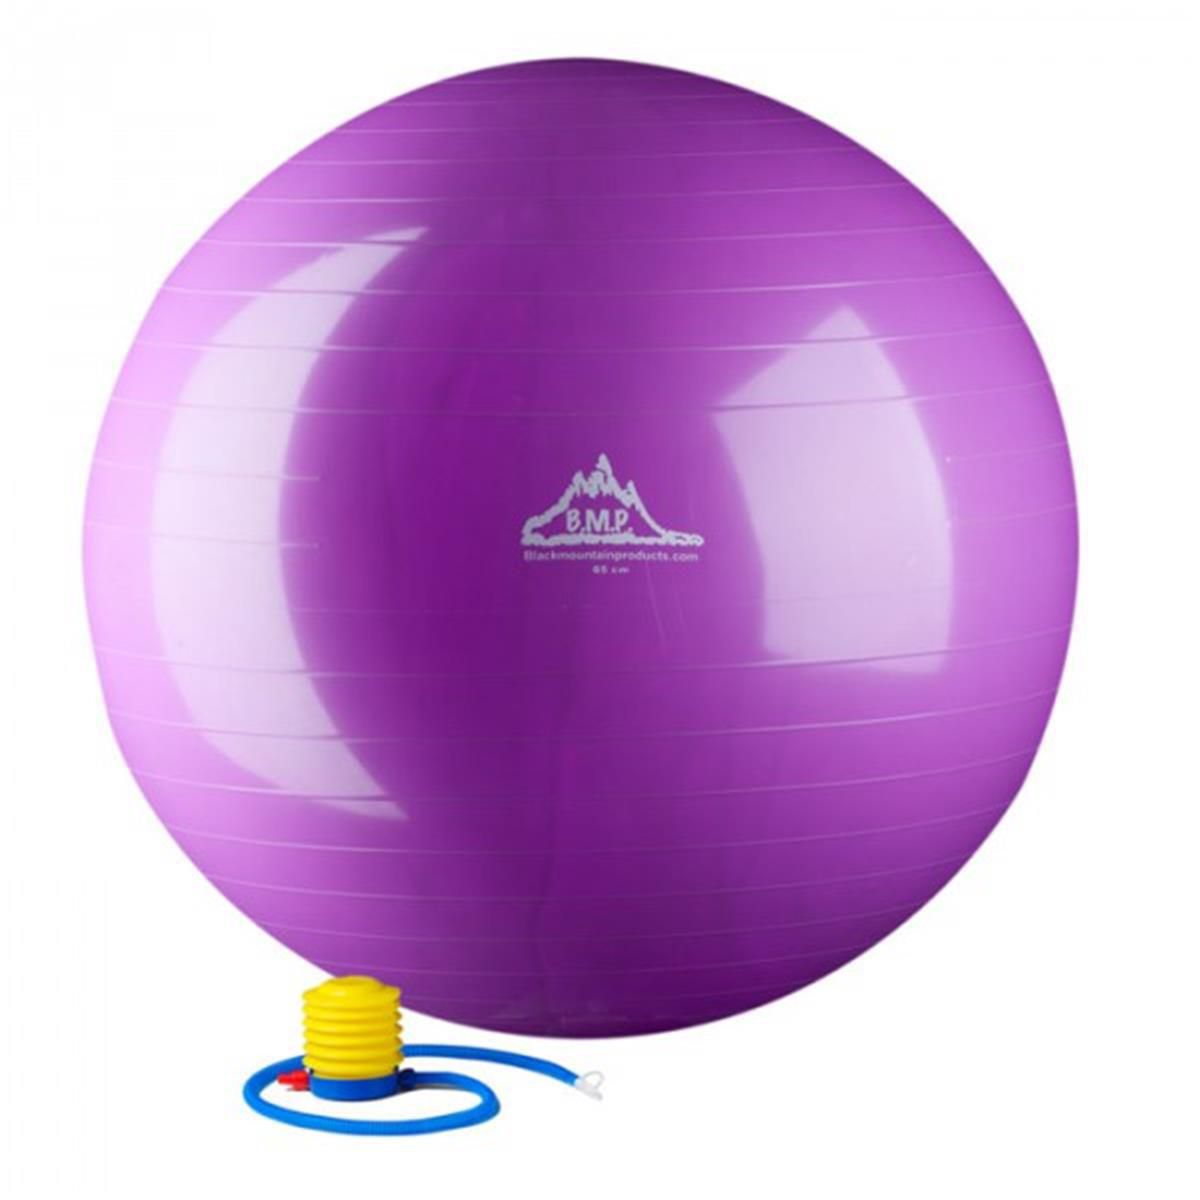 Image for HWR 55 cm. Static Strength Exercise Stability Ball, Purple at Kohl's.